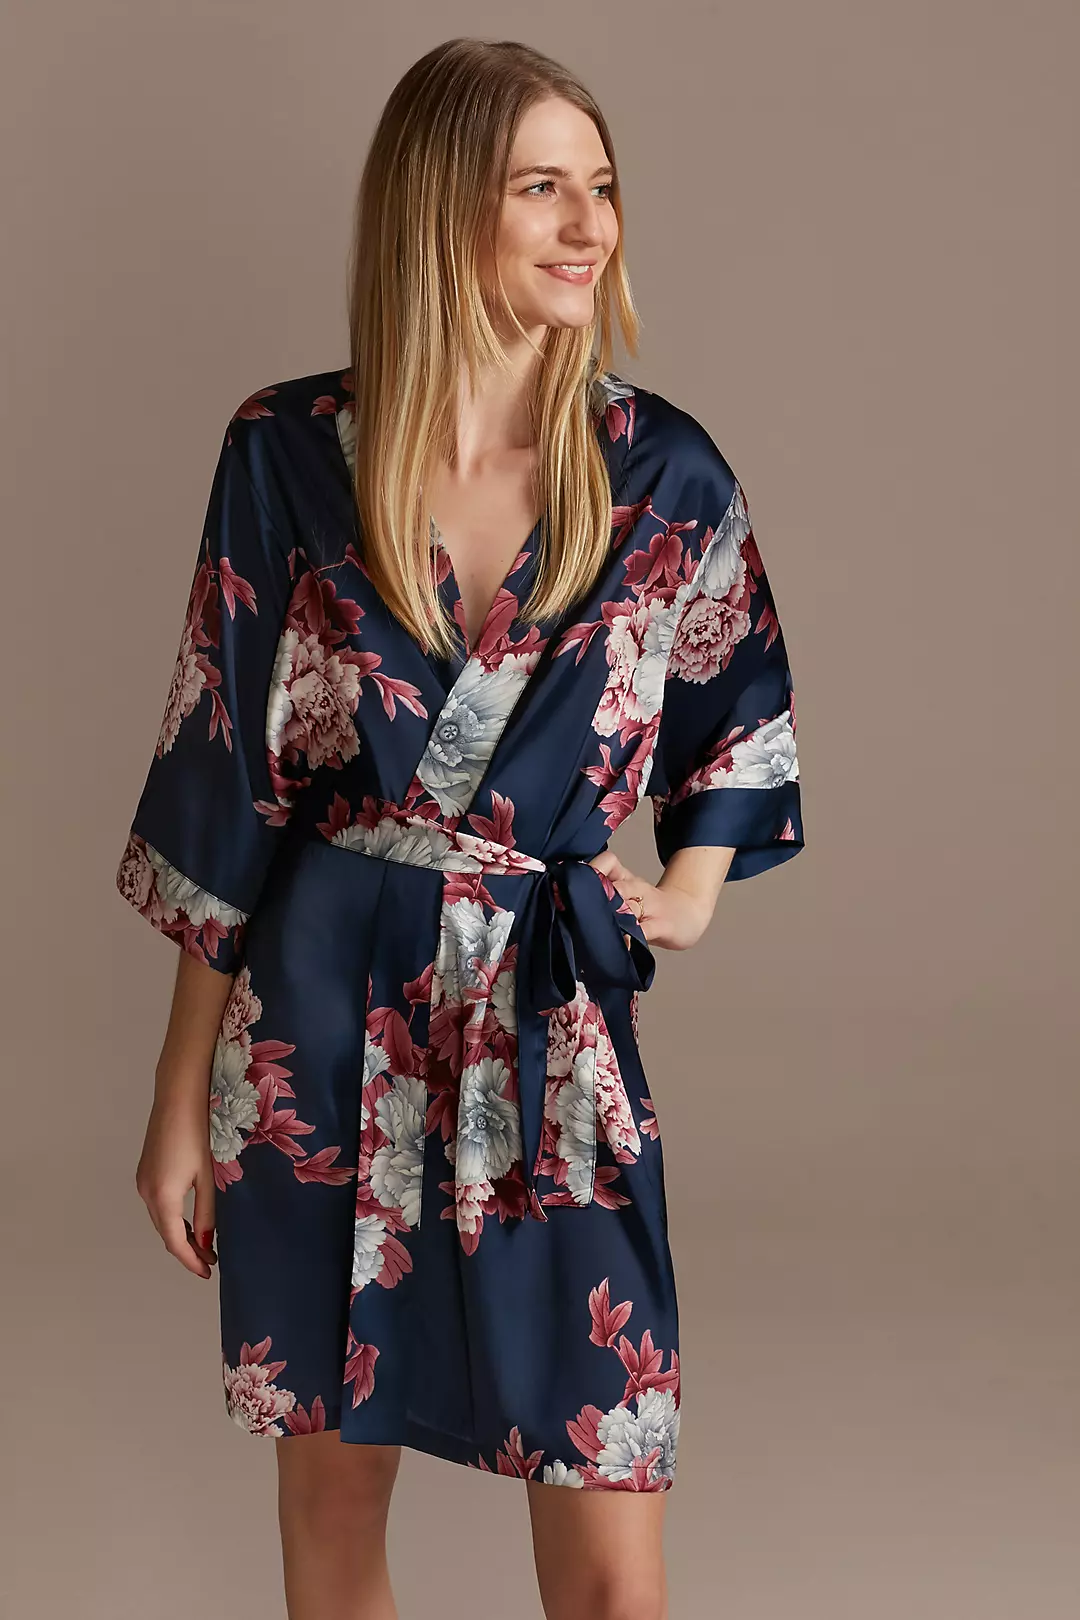 Marine and Wine Floral Satin Robe Image